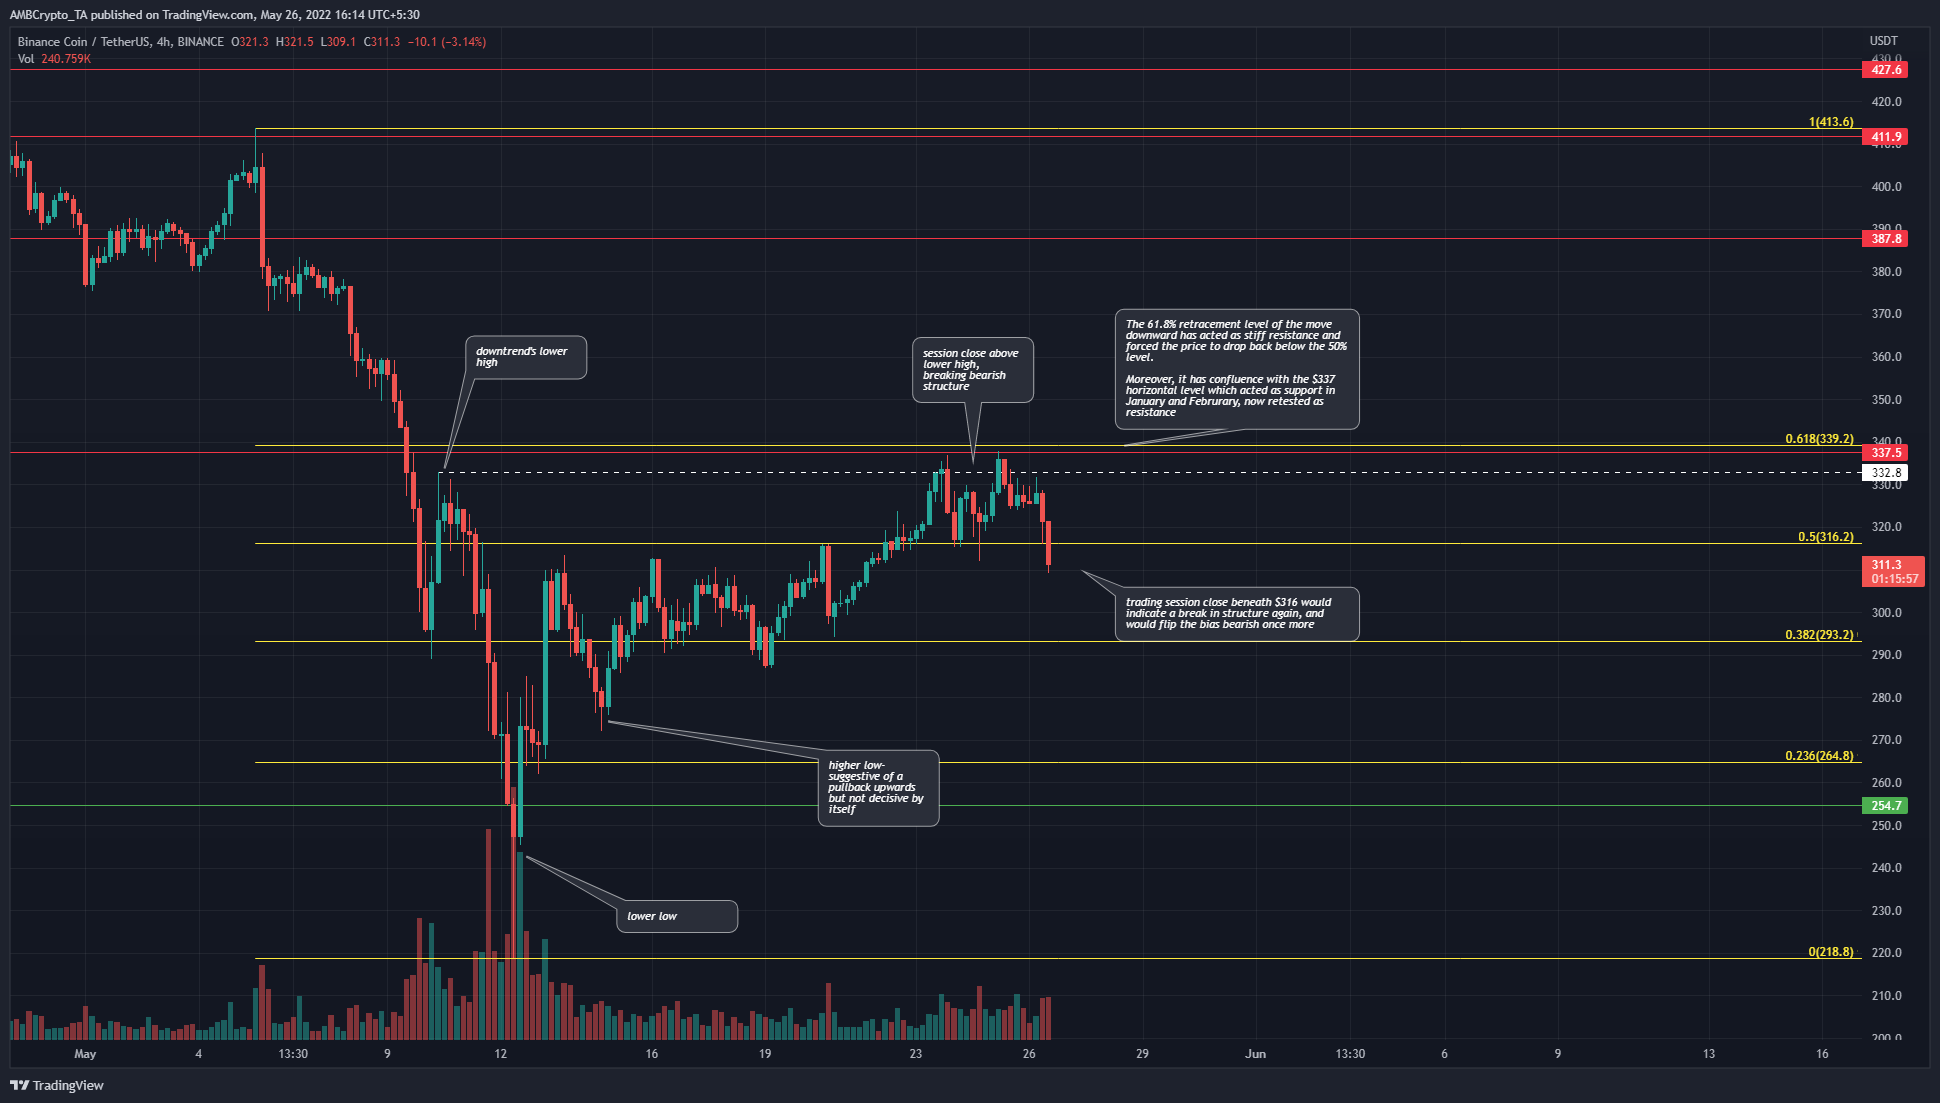 Shorting opportunity on Binance Coin after a drop beneath support